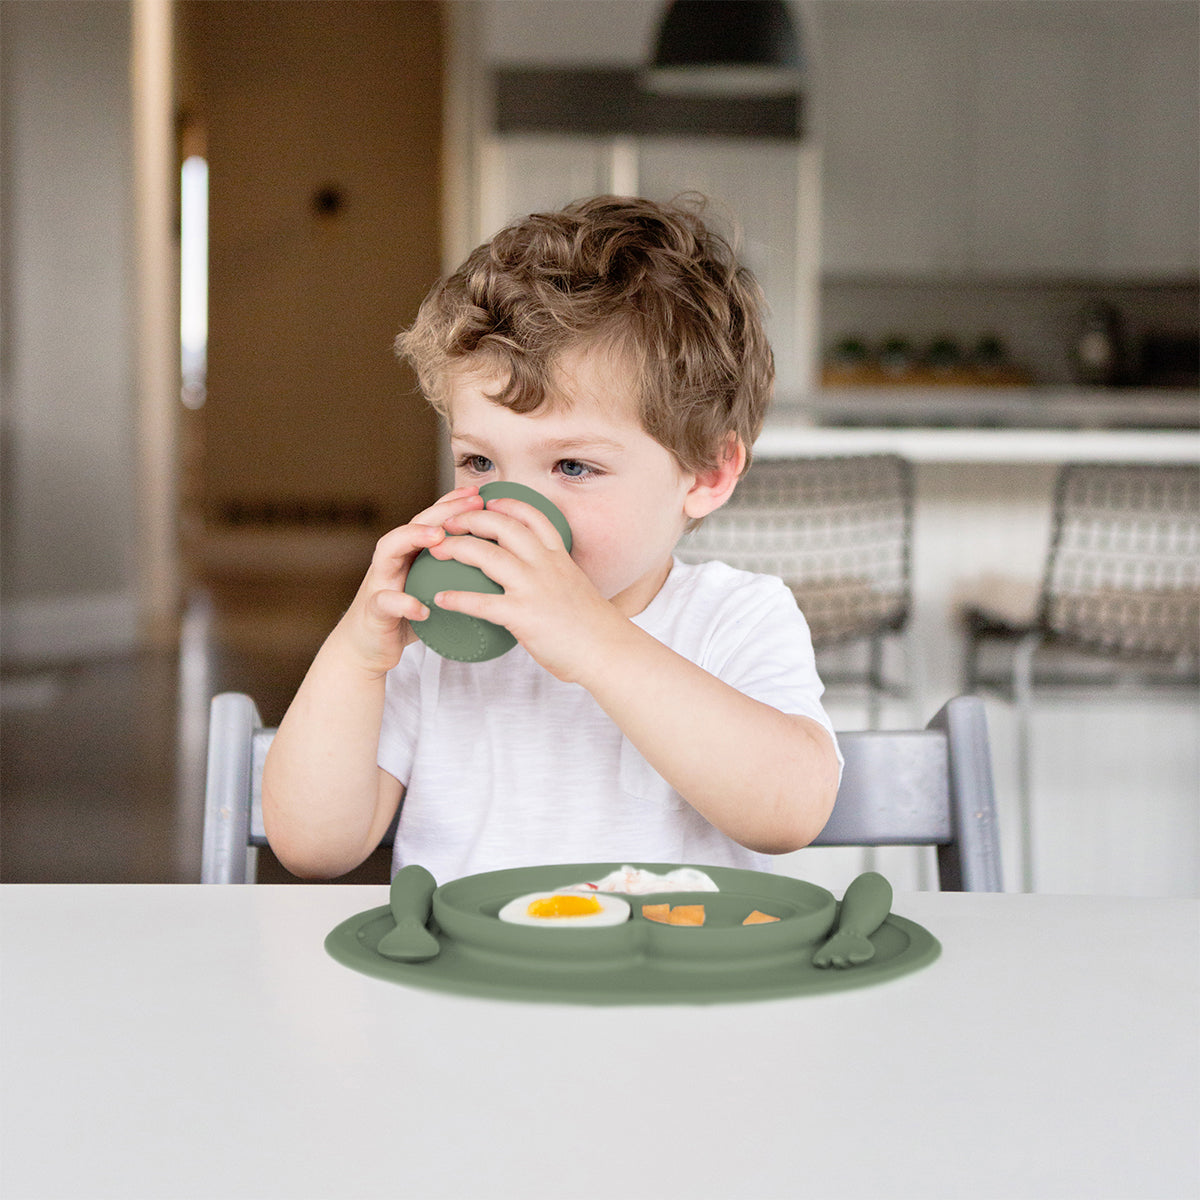 Mini Feeding Set in Olive by ezpz / Silicone Plate, Fork & Spoon for Toddlers